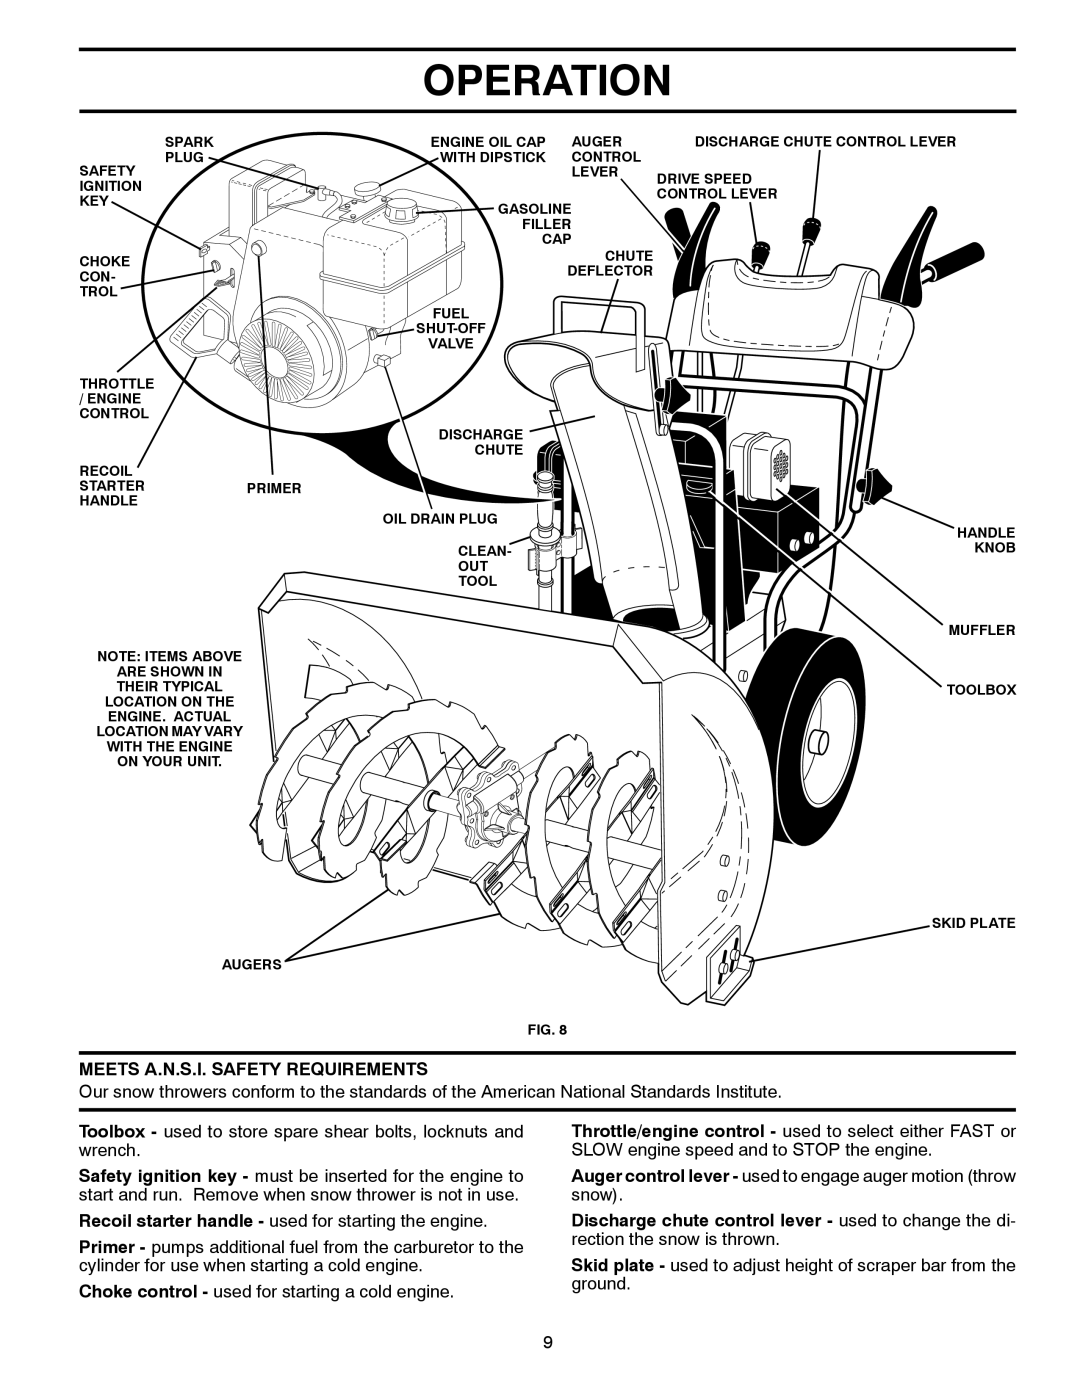 Poulan 418971 owner manual Operation, Meets A.N.S.I. Safety Requirements 